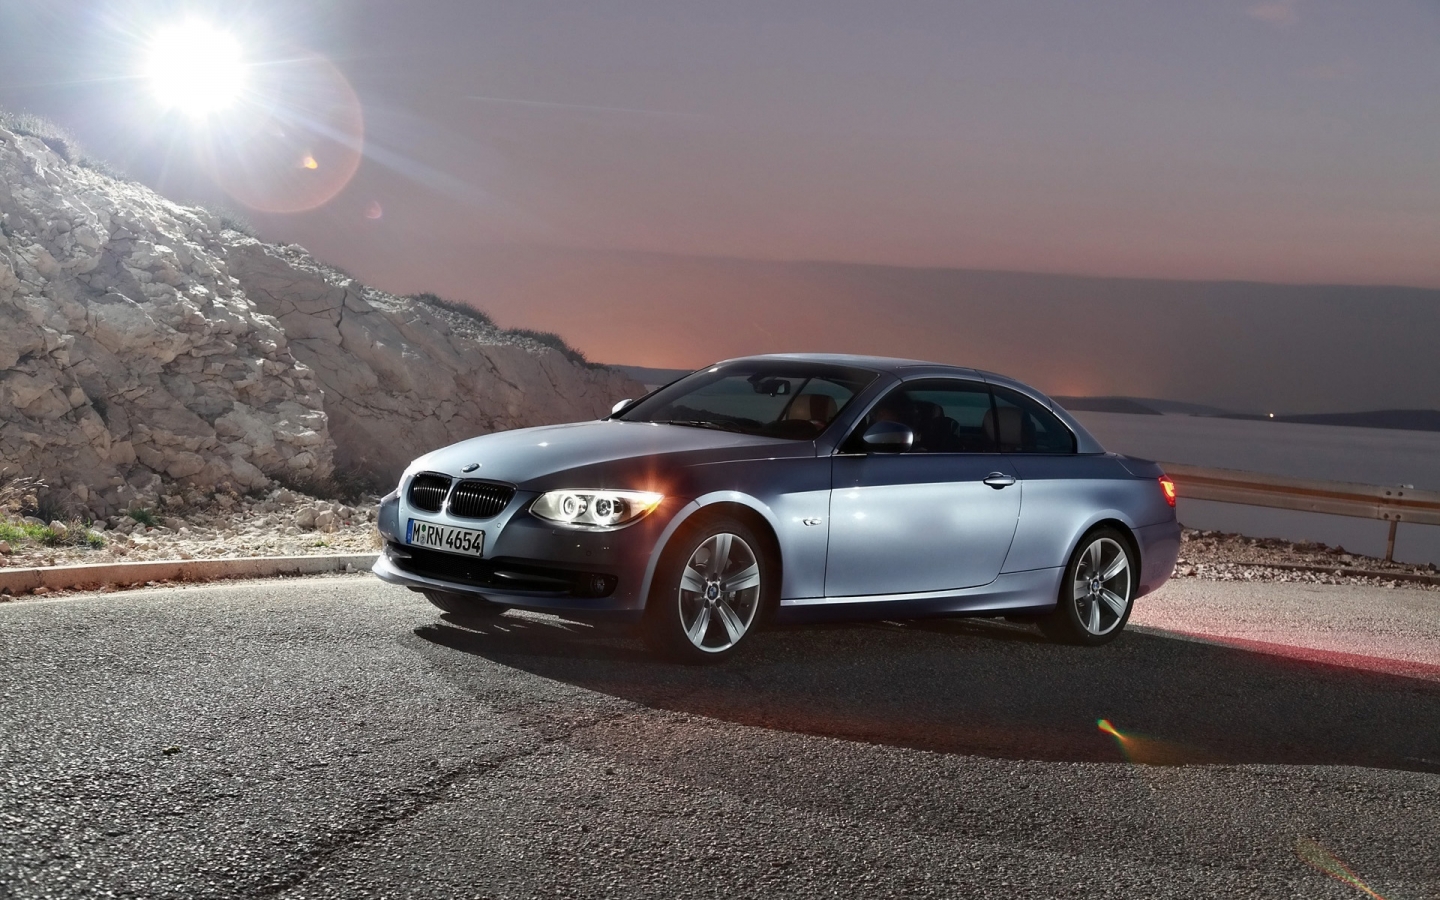 BMW 3 Series Silver 2010 Top Up for 1440 x 900 widescreen resolution